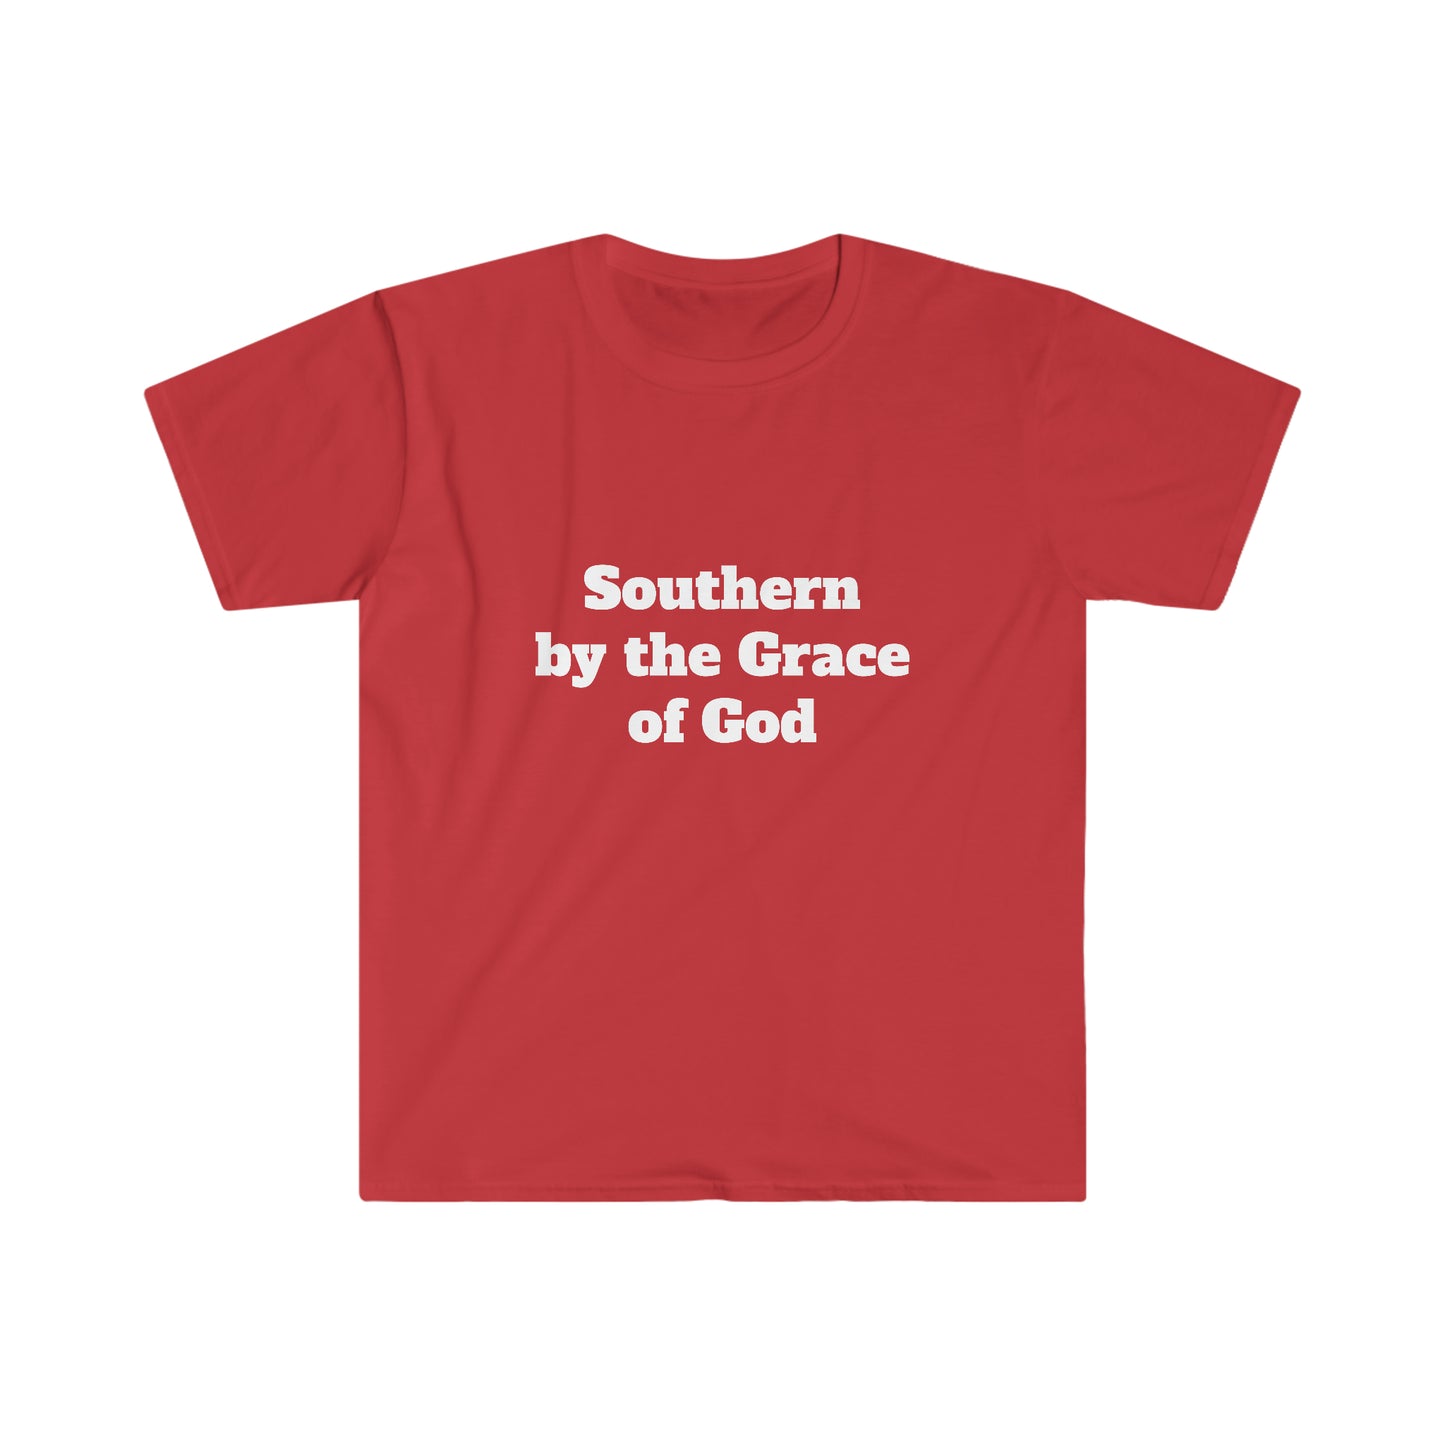 Southern by the Grace of God Unisex Softstyle T-Shirt